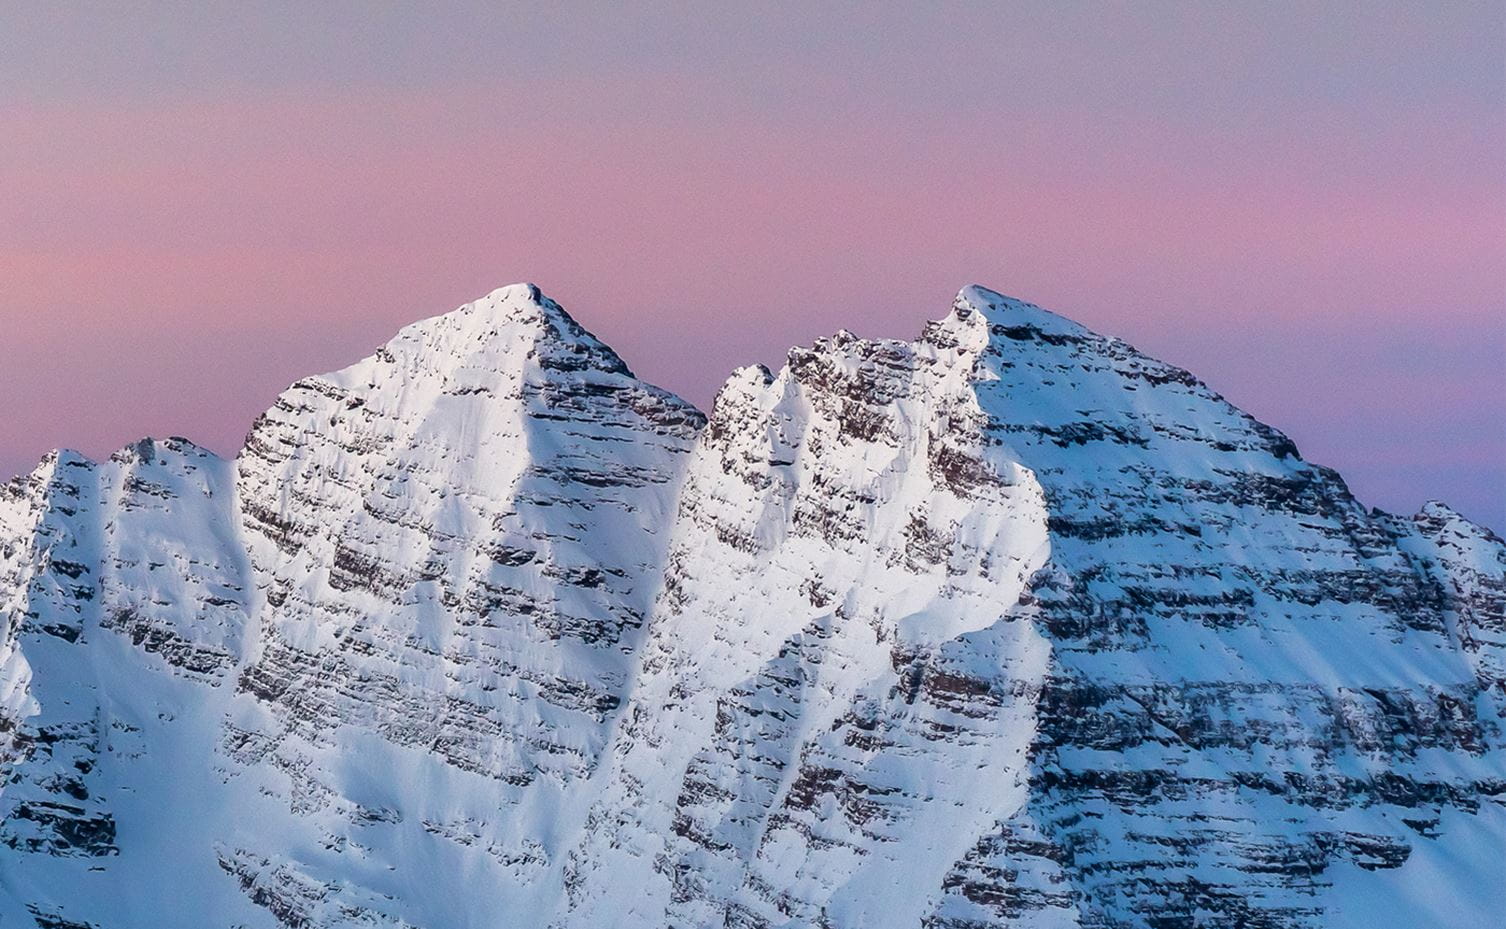 The Maroon Bells in winter at dawn